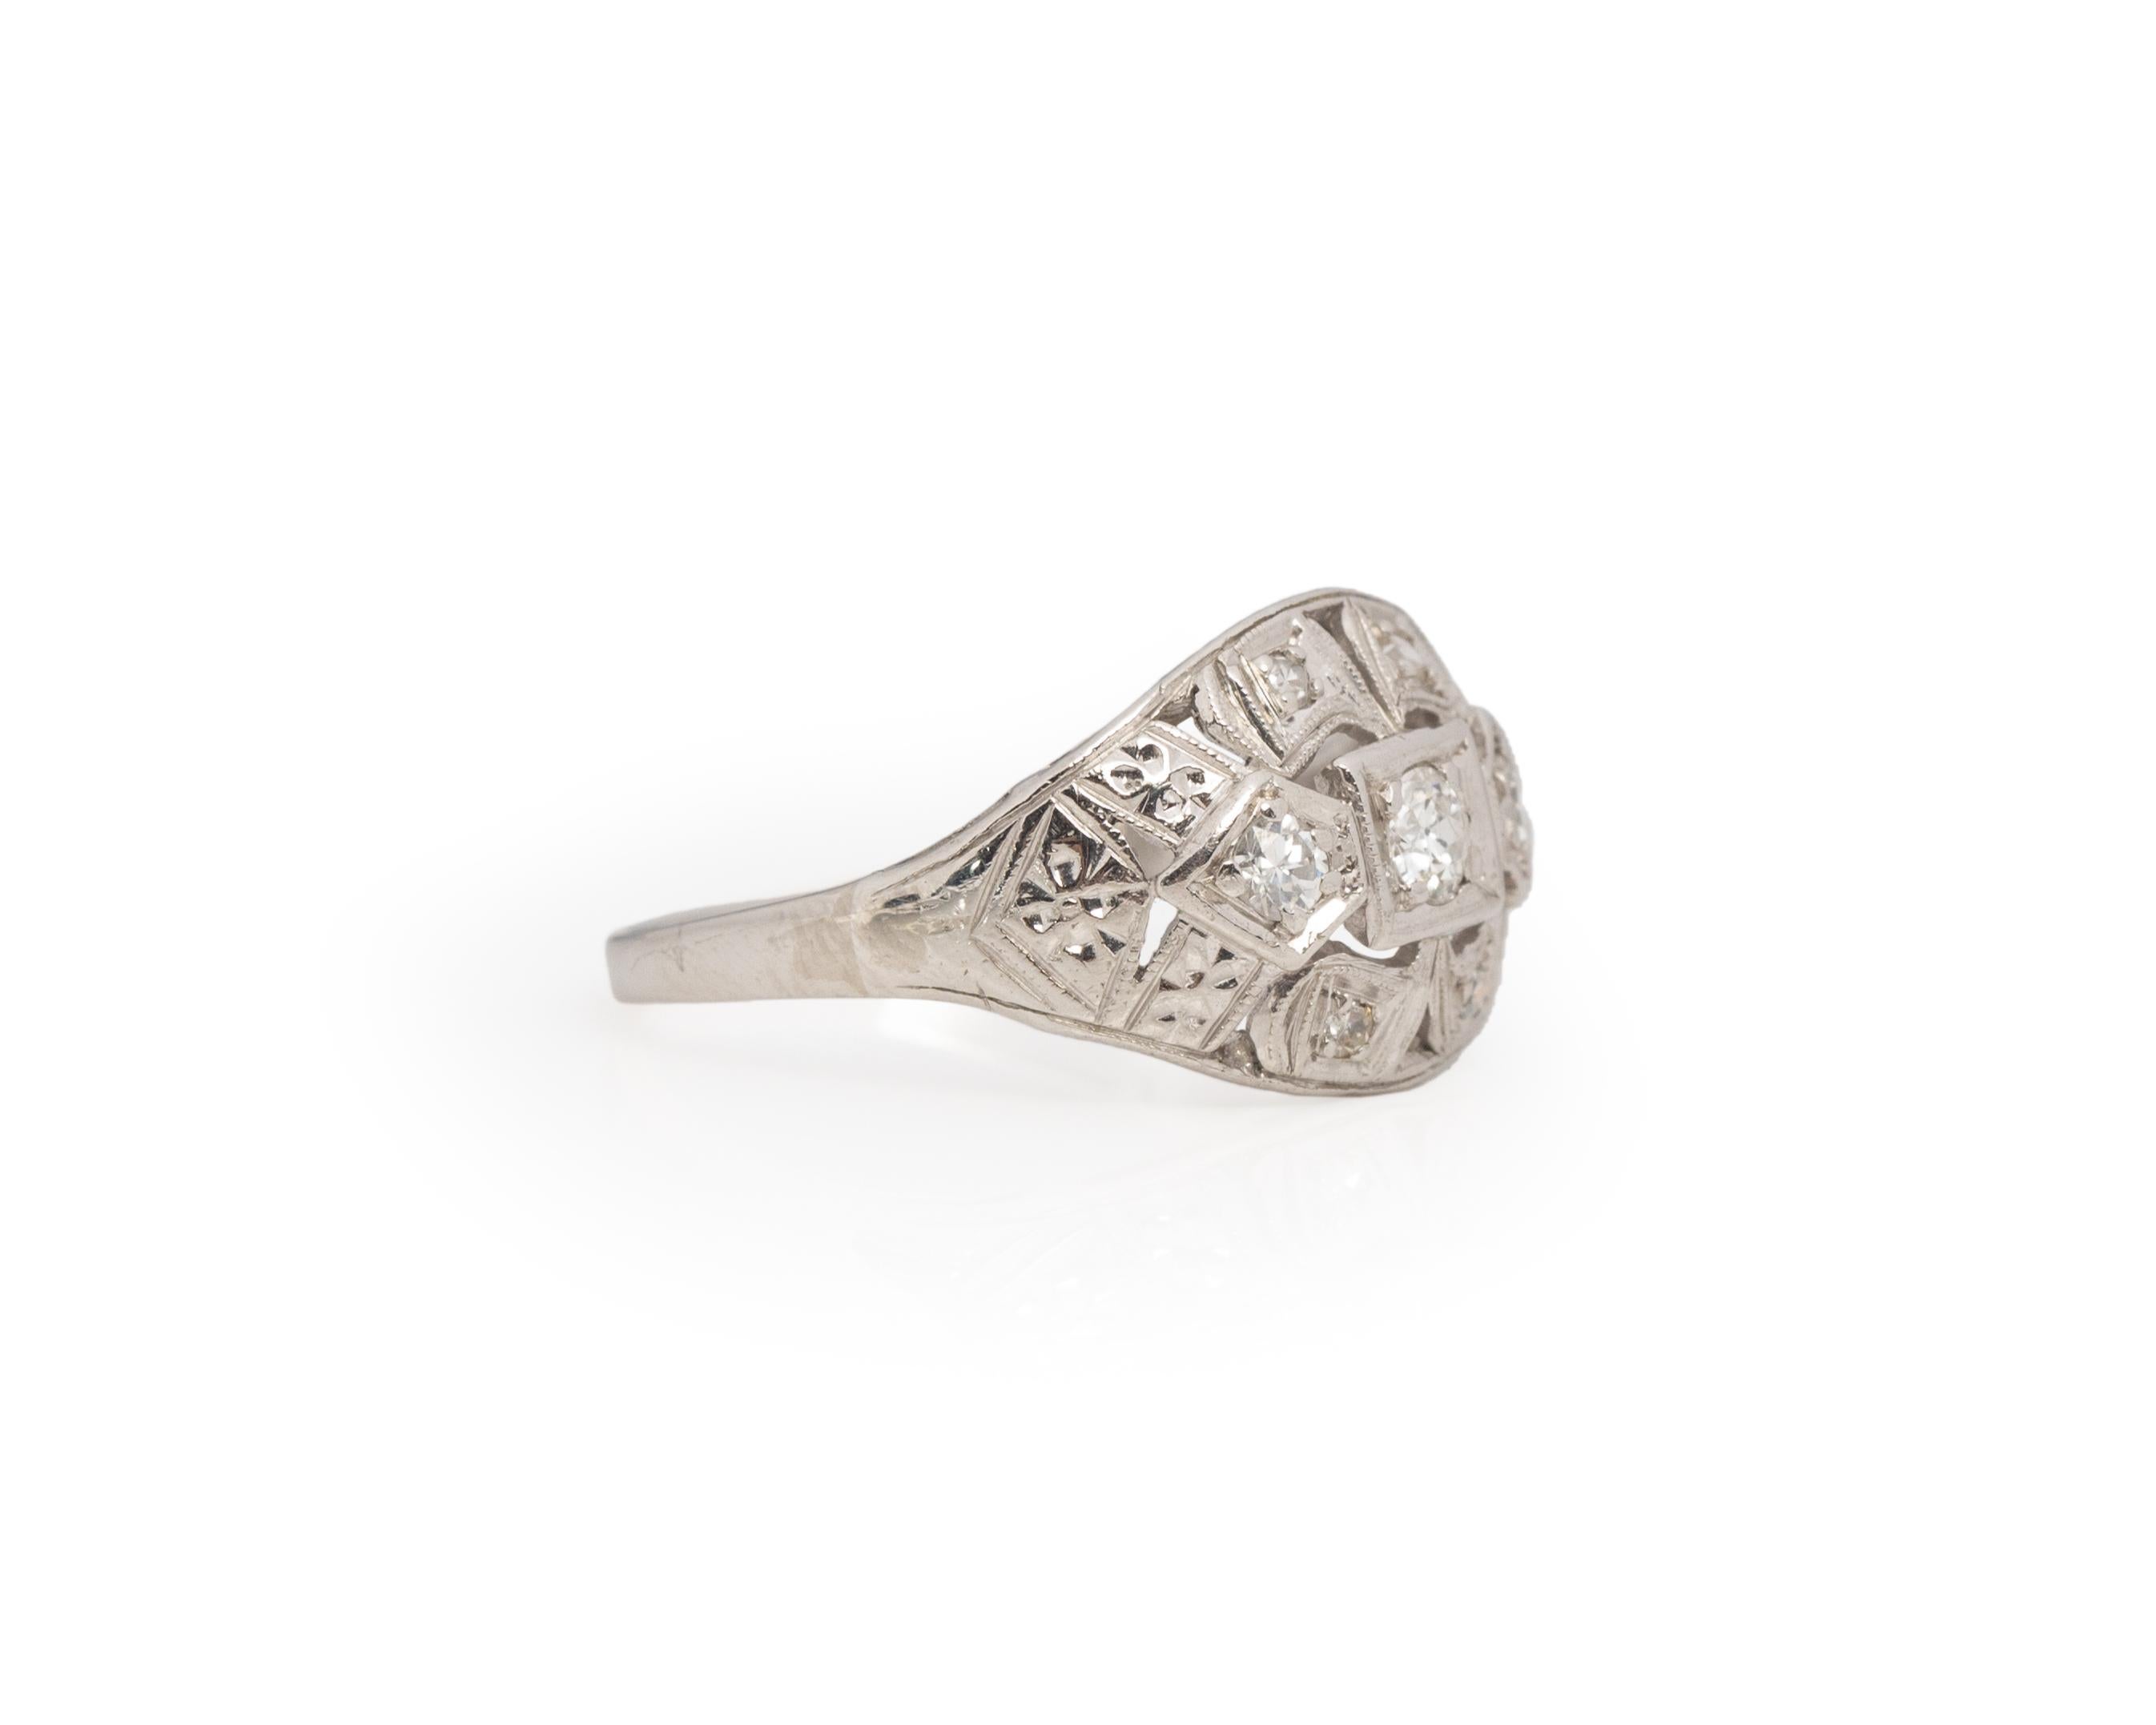 Ring Size: 6.5
Metal Type: Platinum [Hallmarked, and Tested]
Weight: 4.1 grams

Diamond Details:
Weight: .25ct, total weight
Cut: Old European brilliant
Color: G
Clarity: VS

Finger to Top of Stone Measurement: 4.mm
Shank/Band Width: